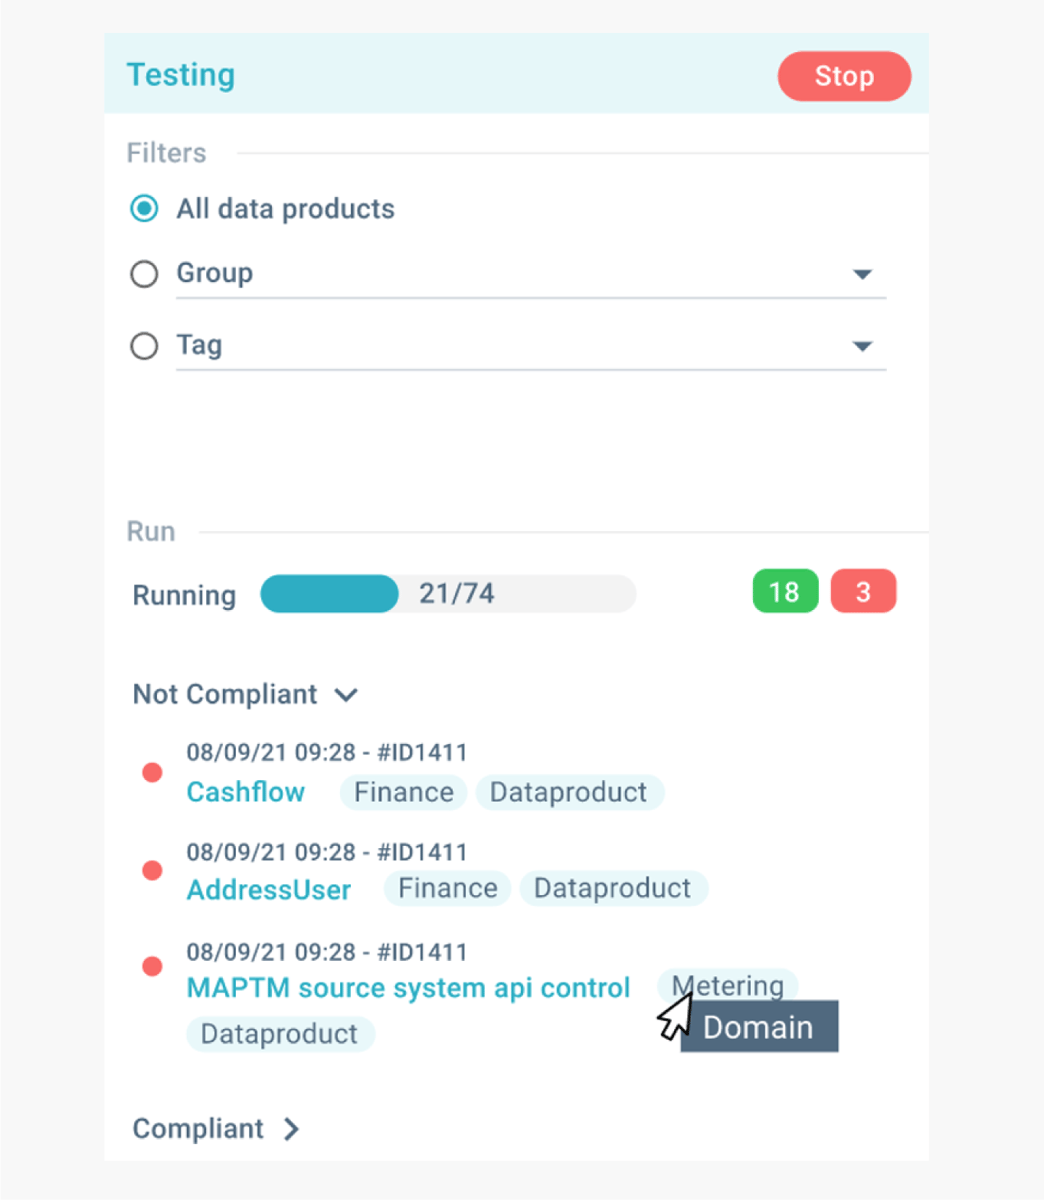 View of Computational Governance Platform's UI displaying its Policy Back Testing feature, where users can test compliance before deploying.